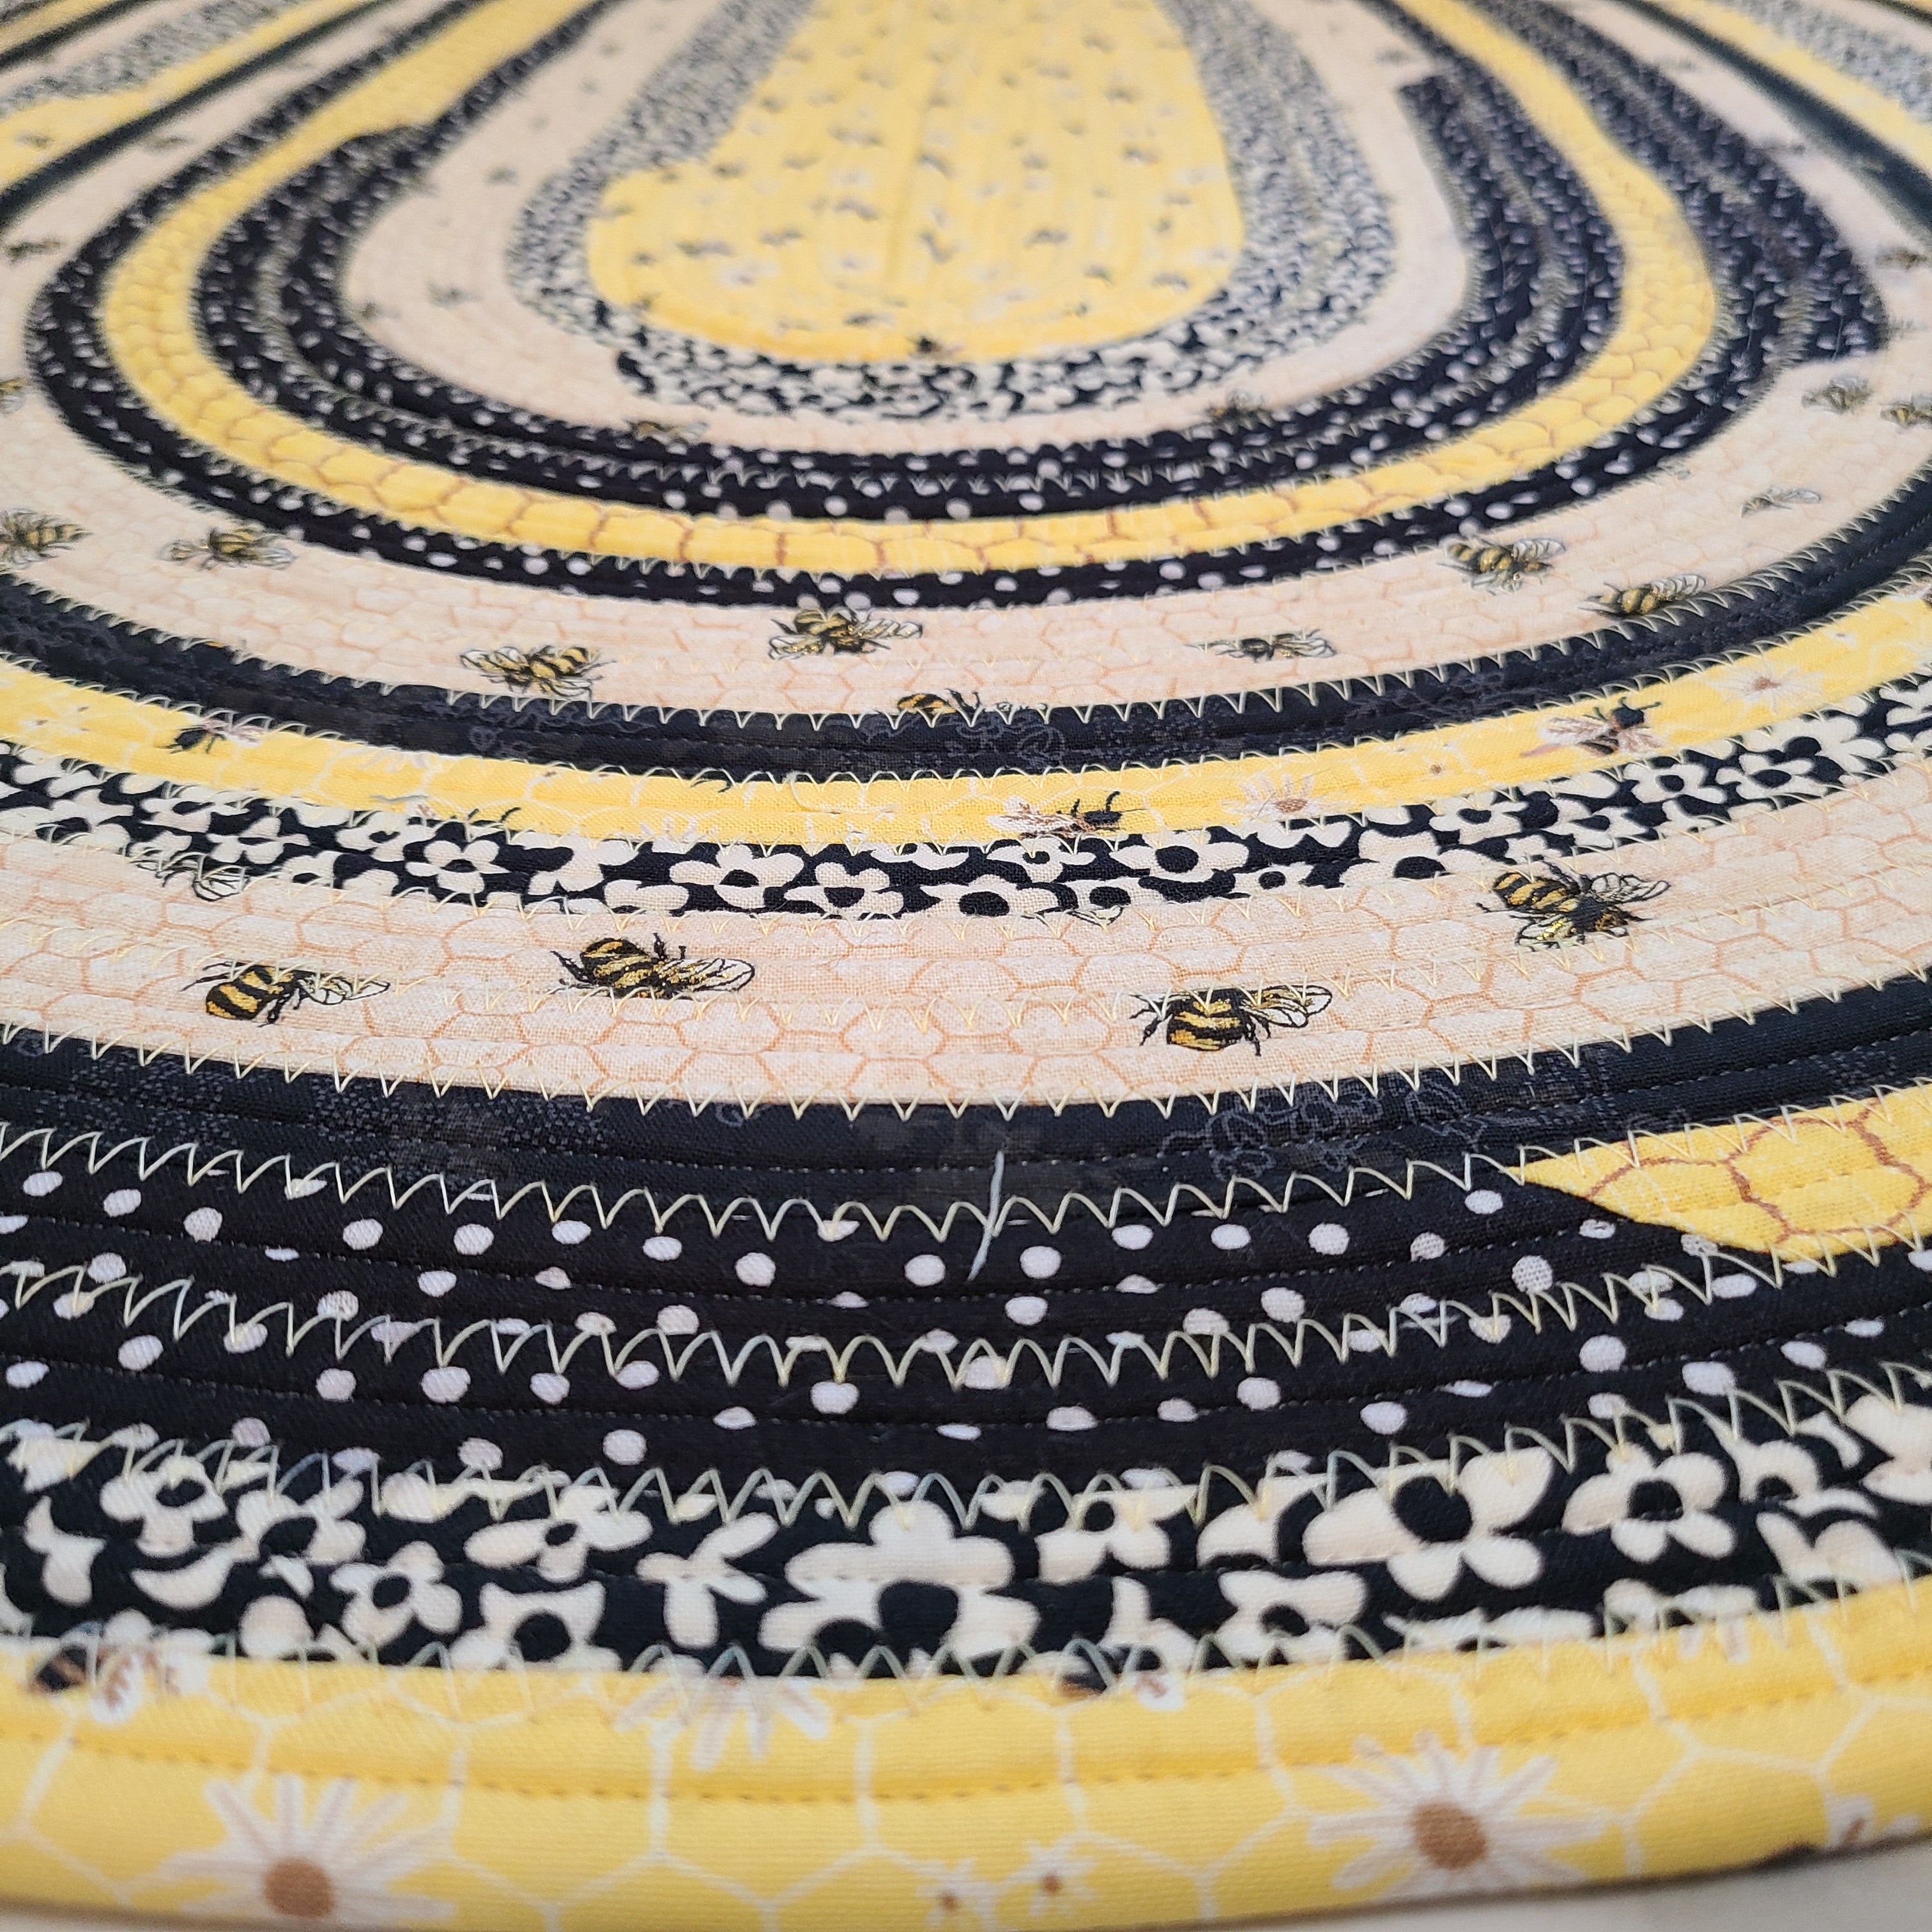 Bees Jelly Roll rug